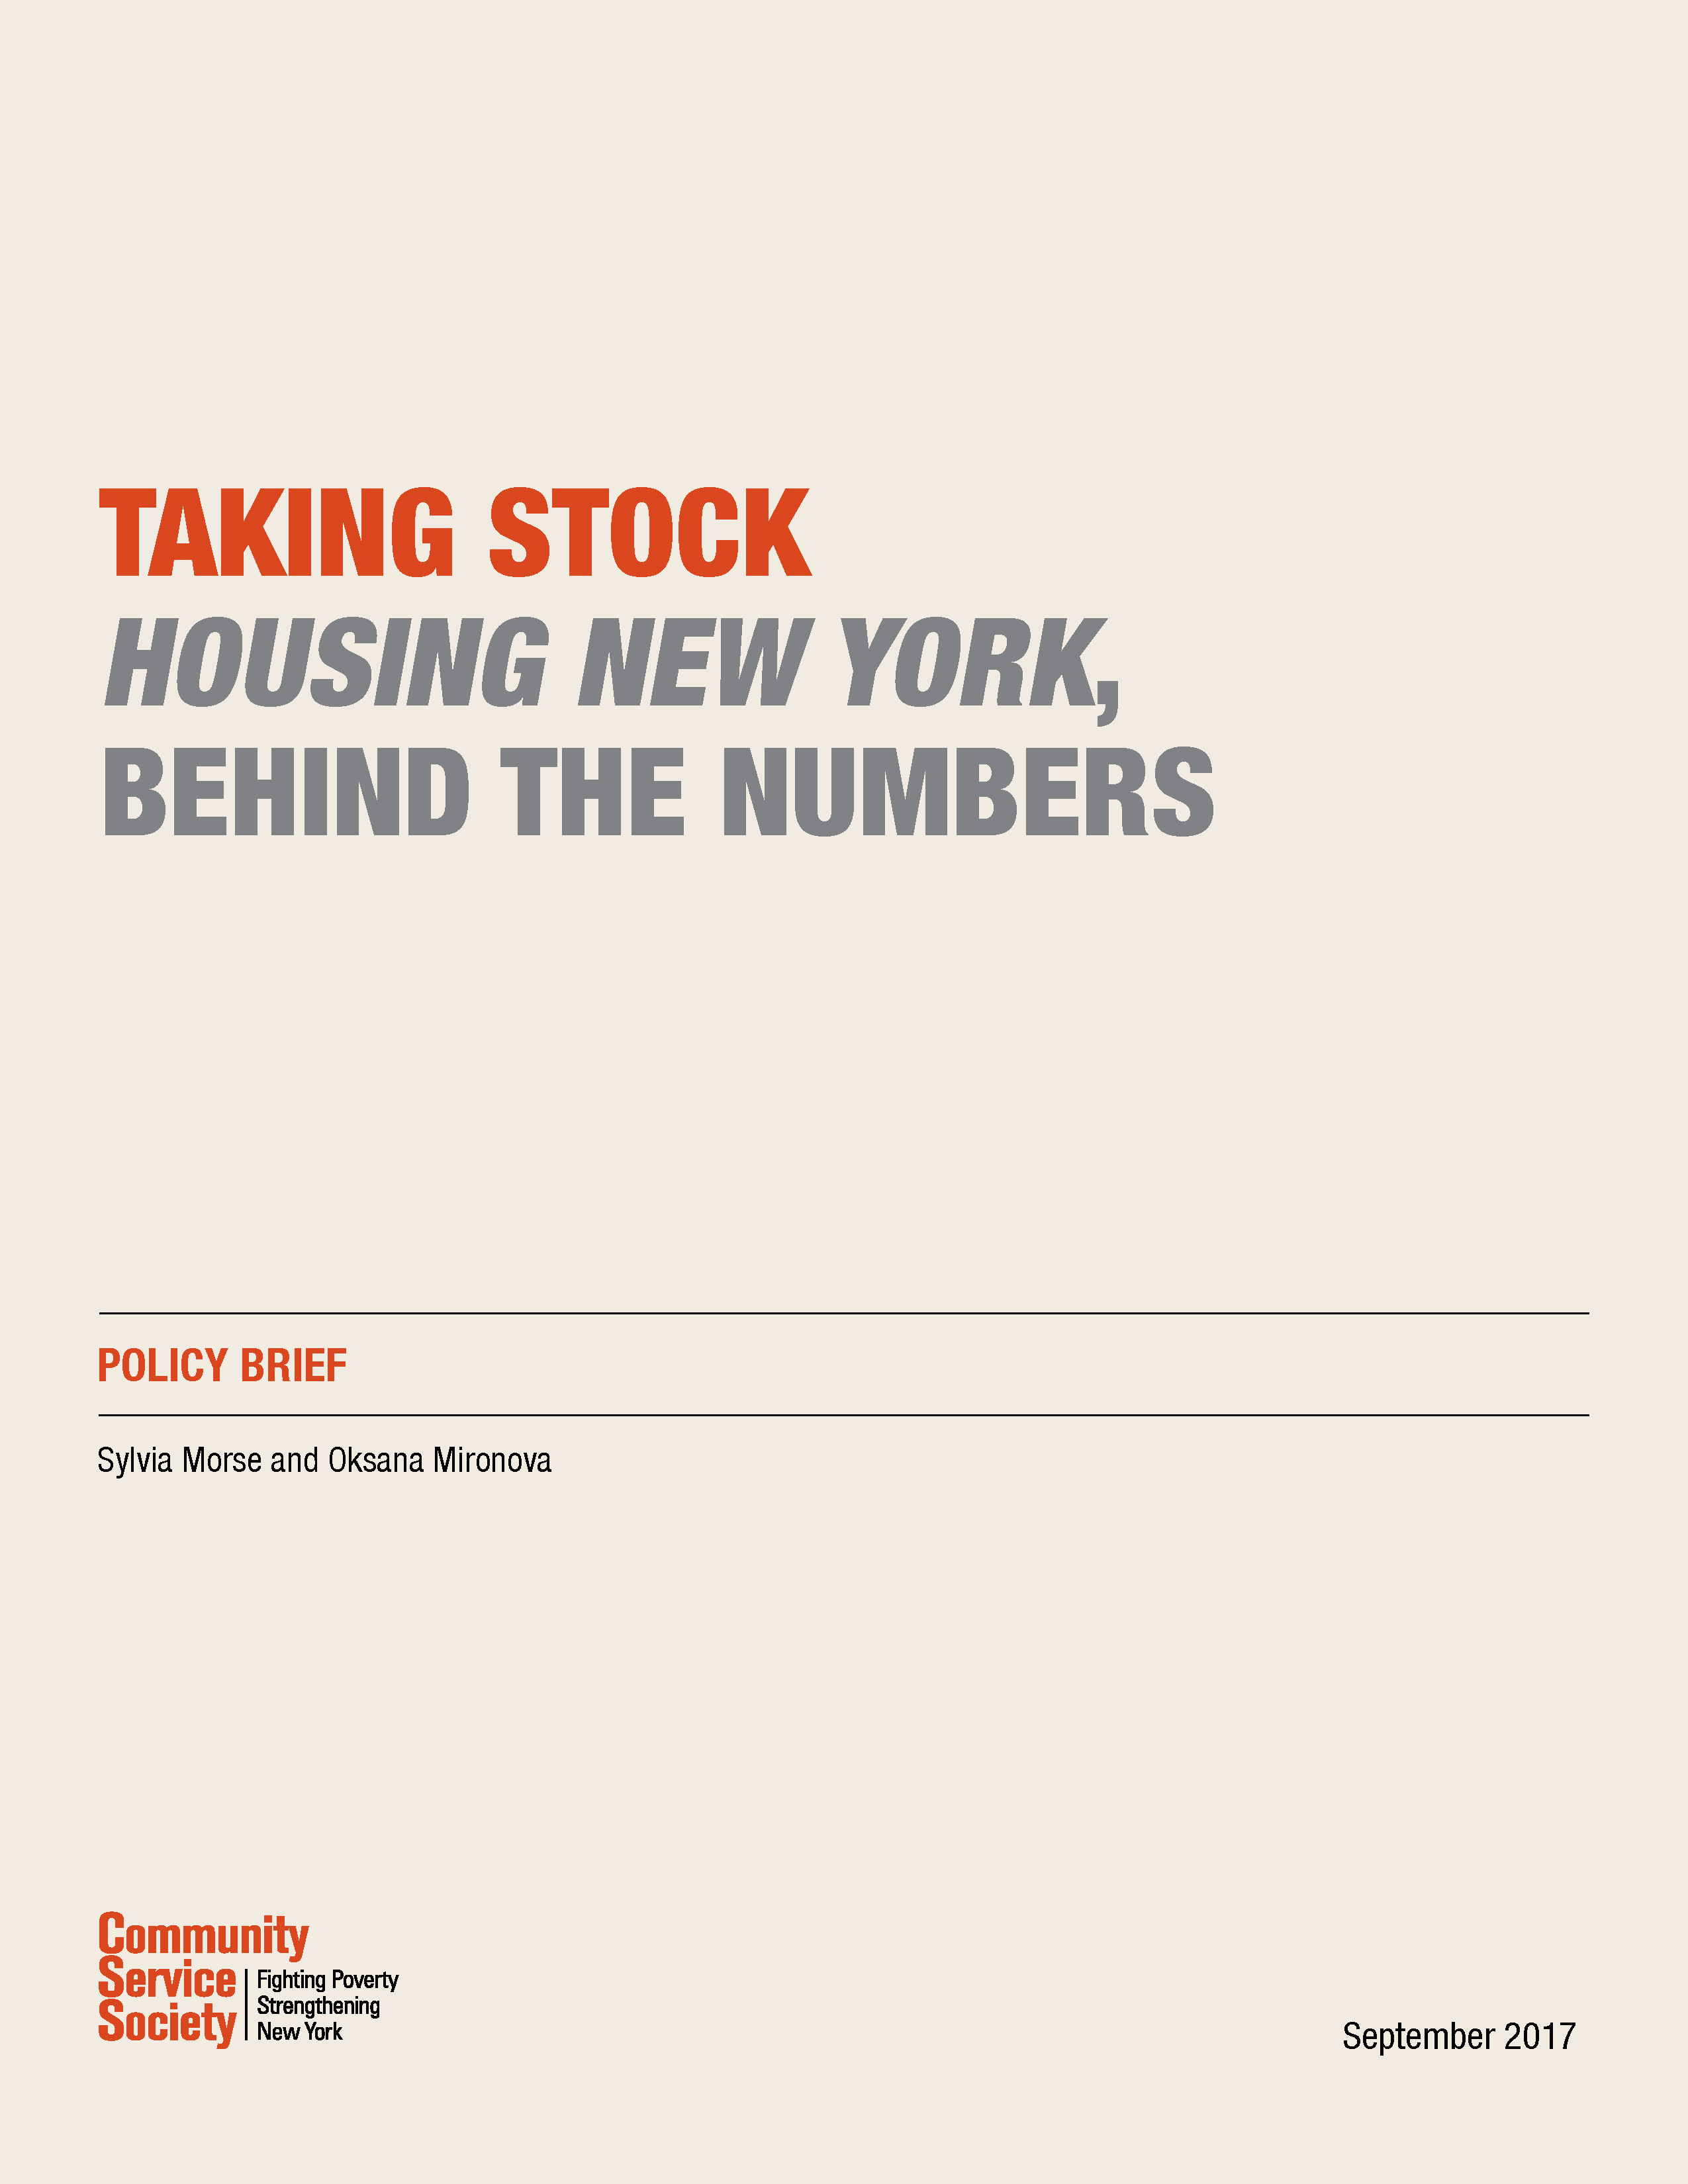 Taking Stock: Housing New York, Behind the Numbers